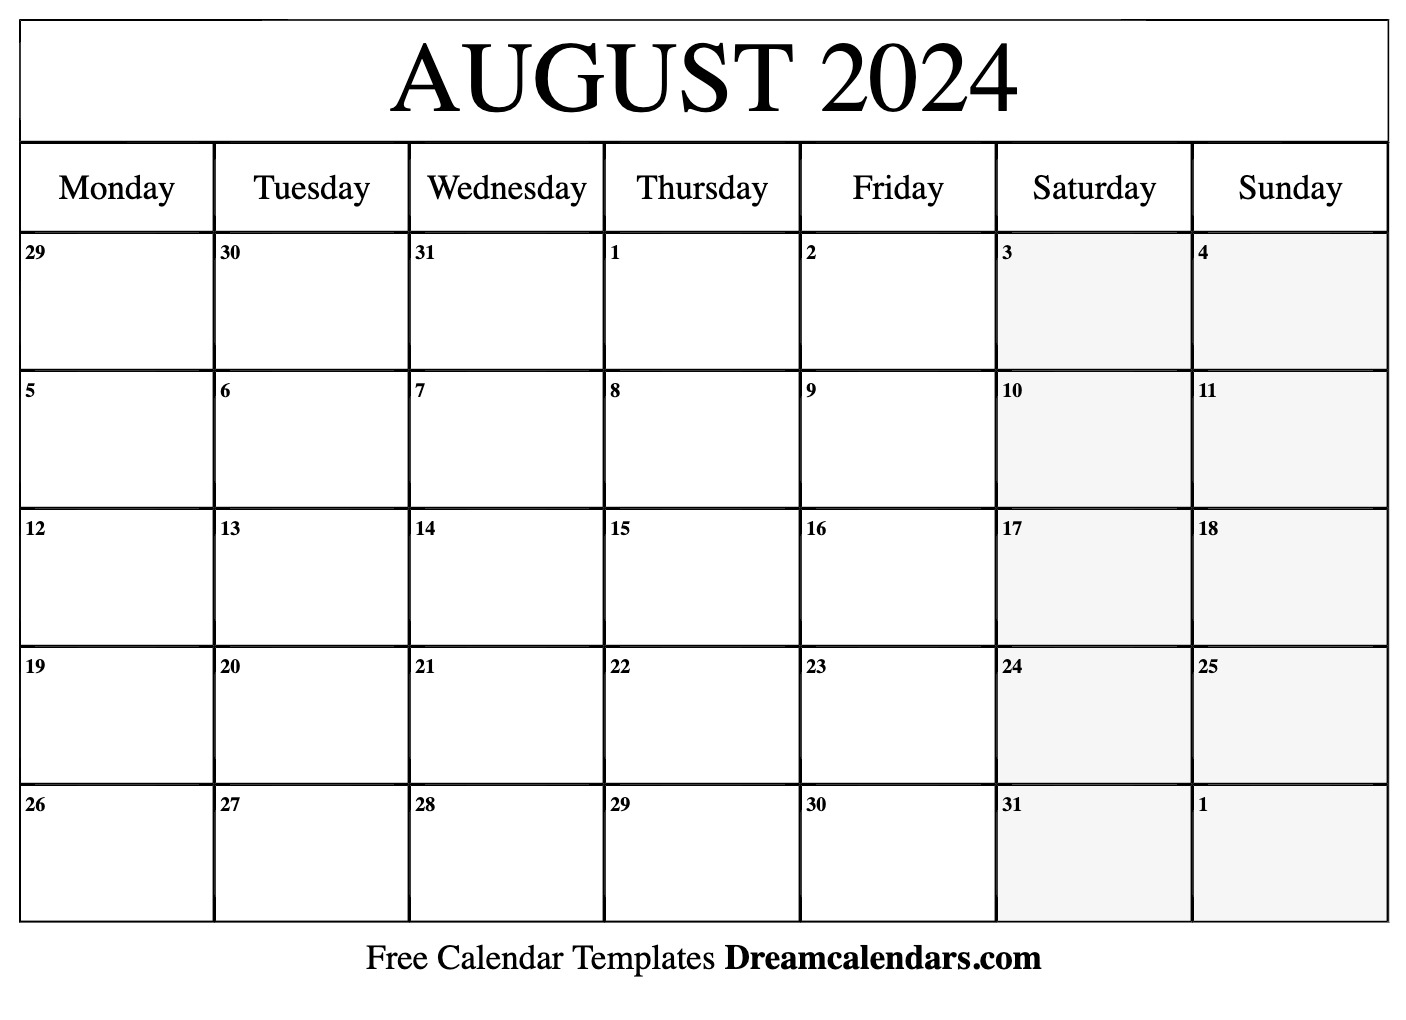 August 2024 Calendar | Free Blank Printable With Holidays for Printable Calendar 2024 August